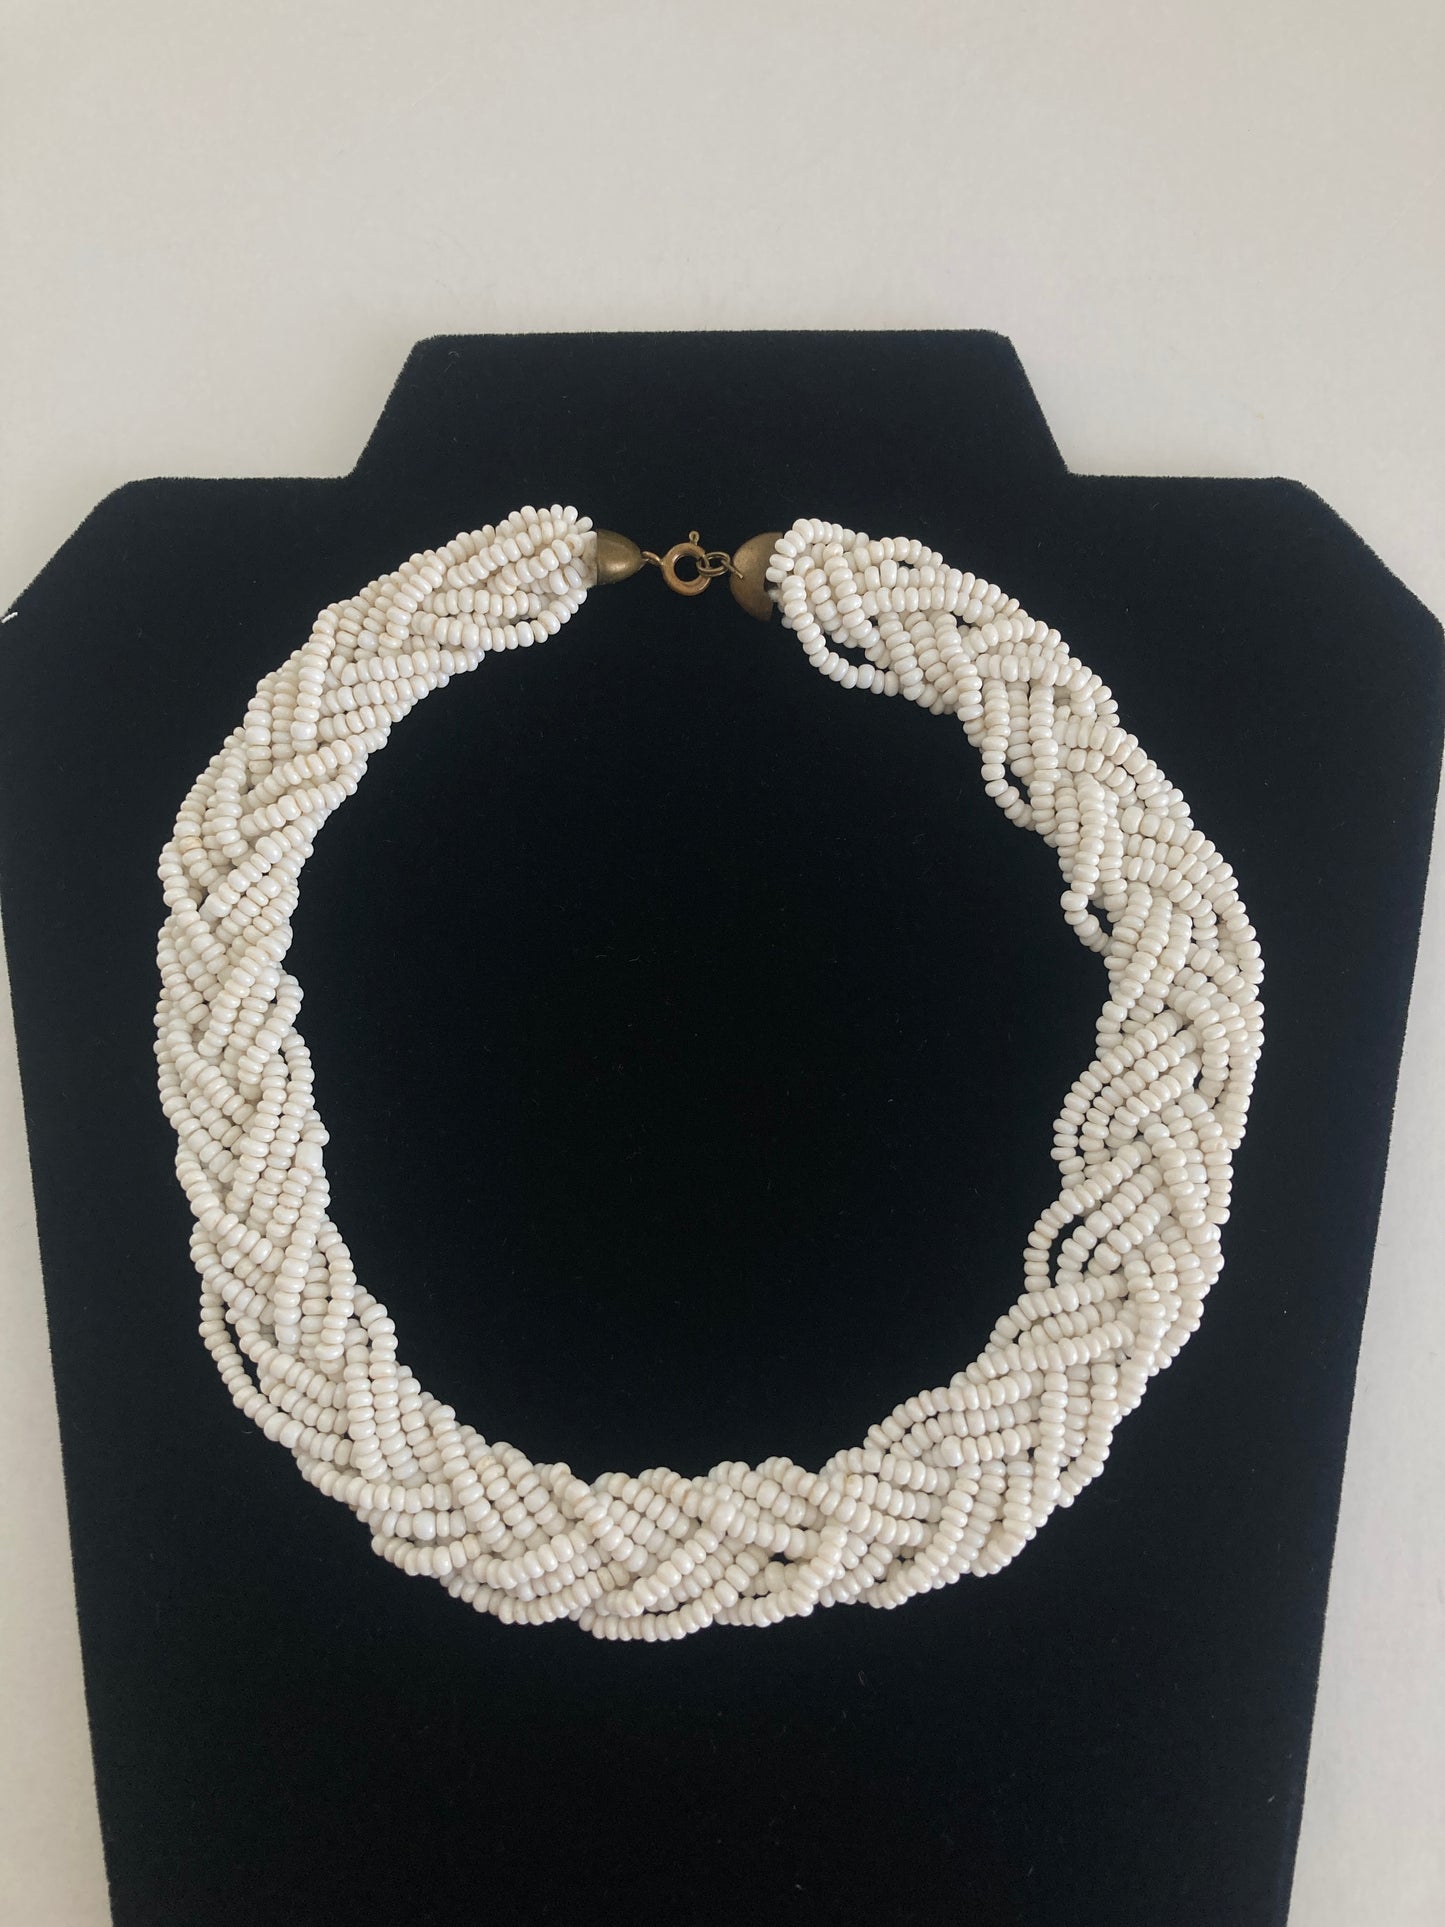 Braided White Glass Beaded Necklace Vintage Seed Beads